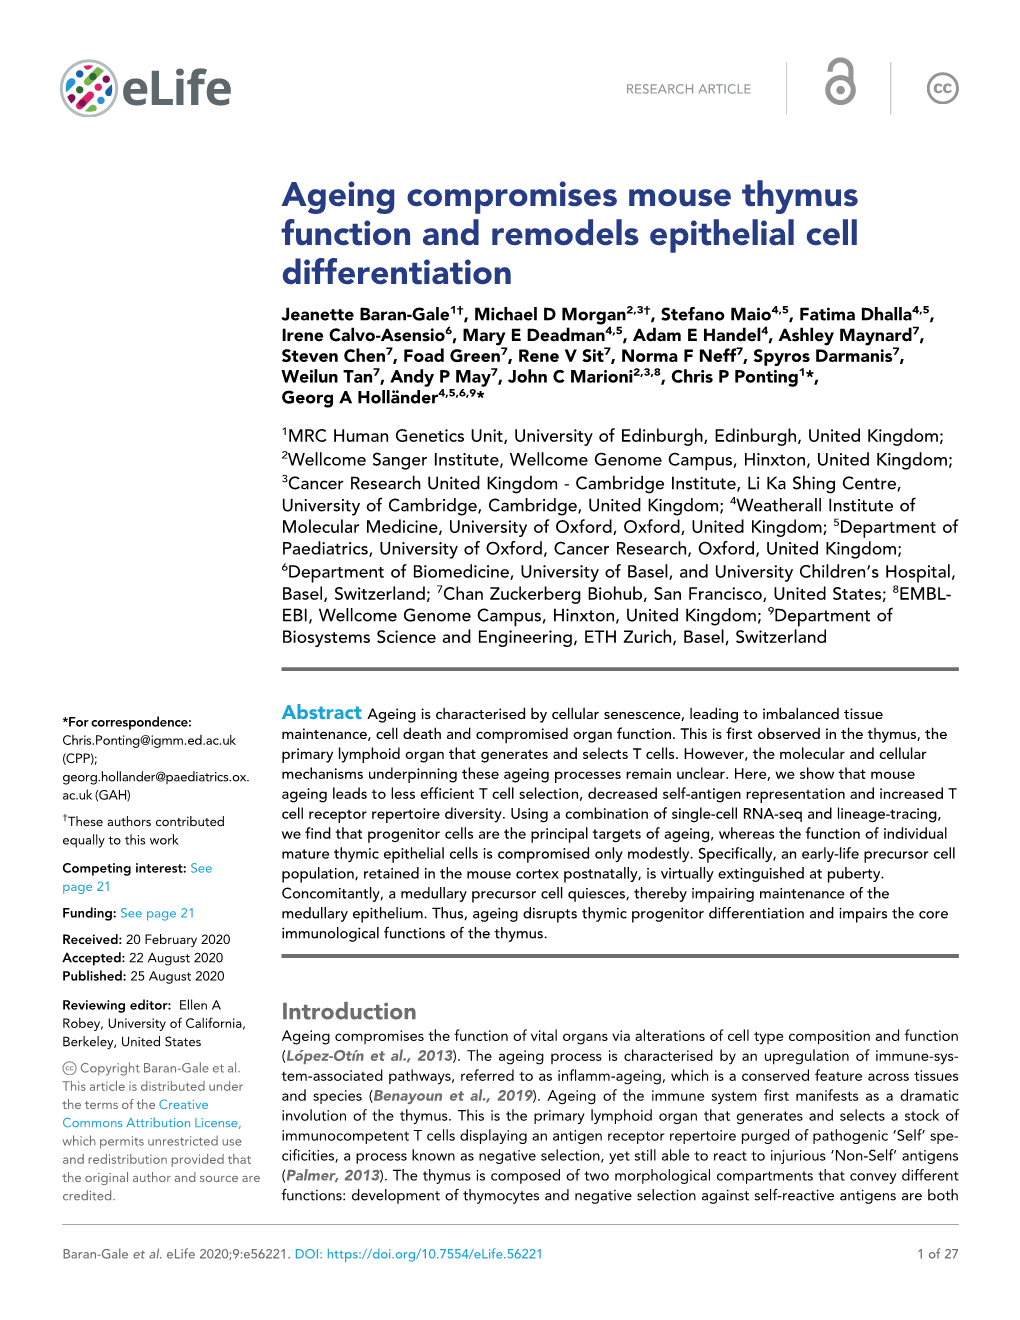 Ageing Compromises Mouse Thymus Function and Remodels Epithelial